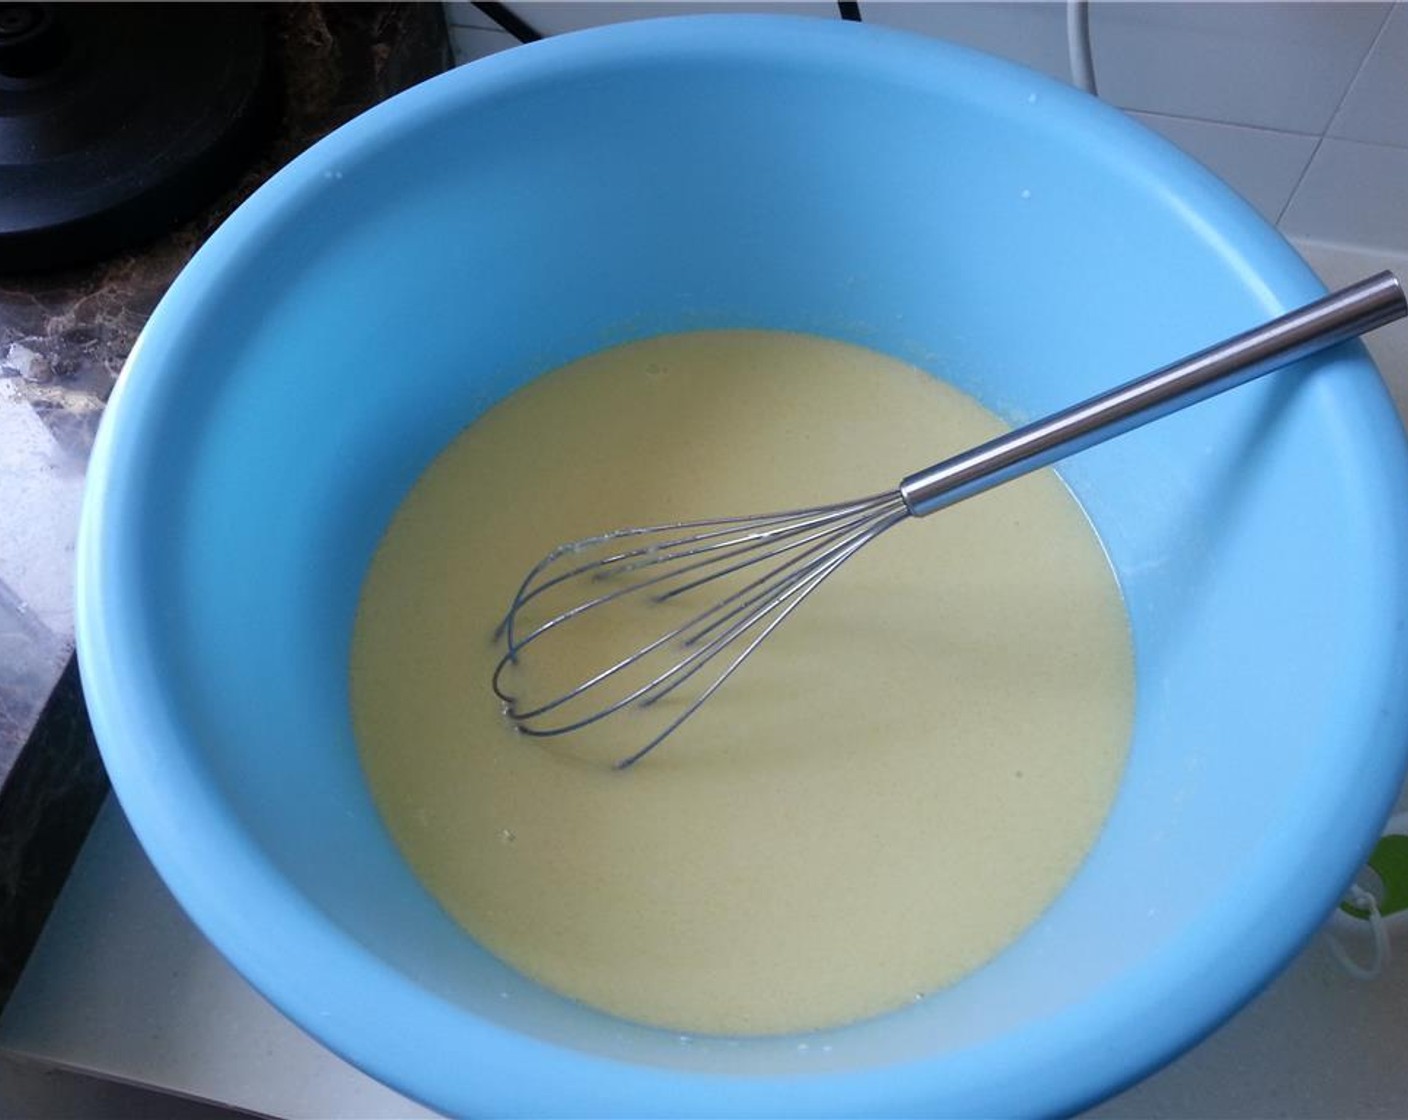 step 2 While you wait for yeast to bloom, in another bowl beat the Eggs (2), Salt (1 1/4 tsp), and Evaporated Milk (1 cup) together. When yeast mixture is ready, mix the egg mixture to the yeast mixture.